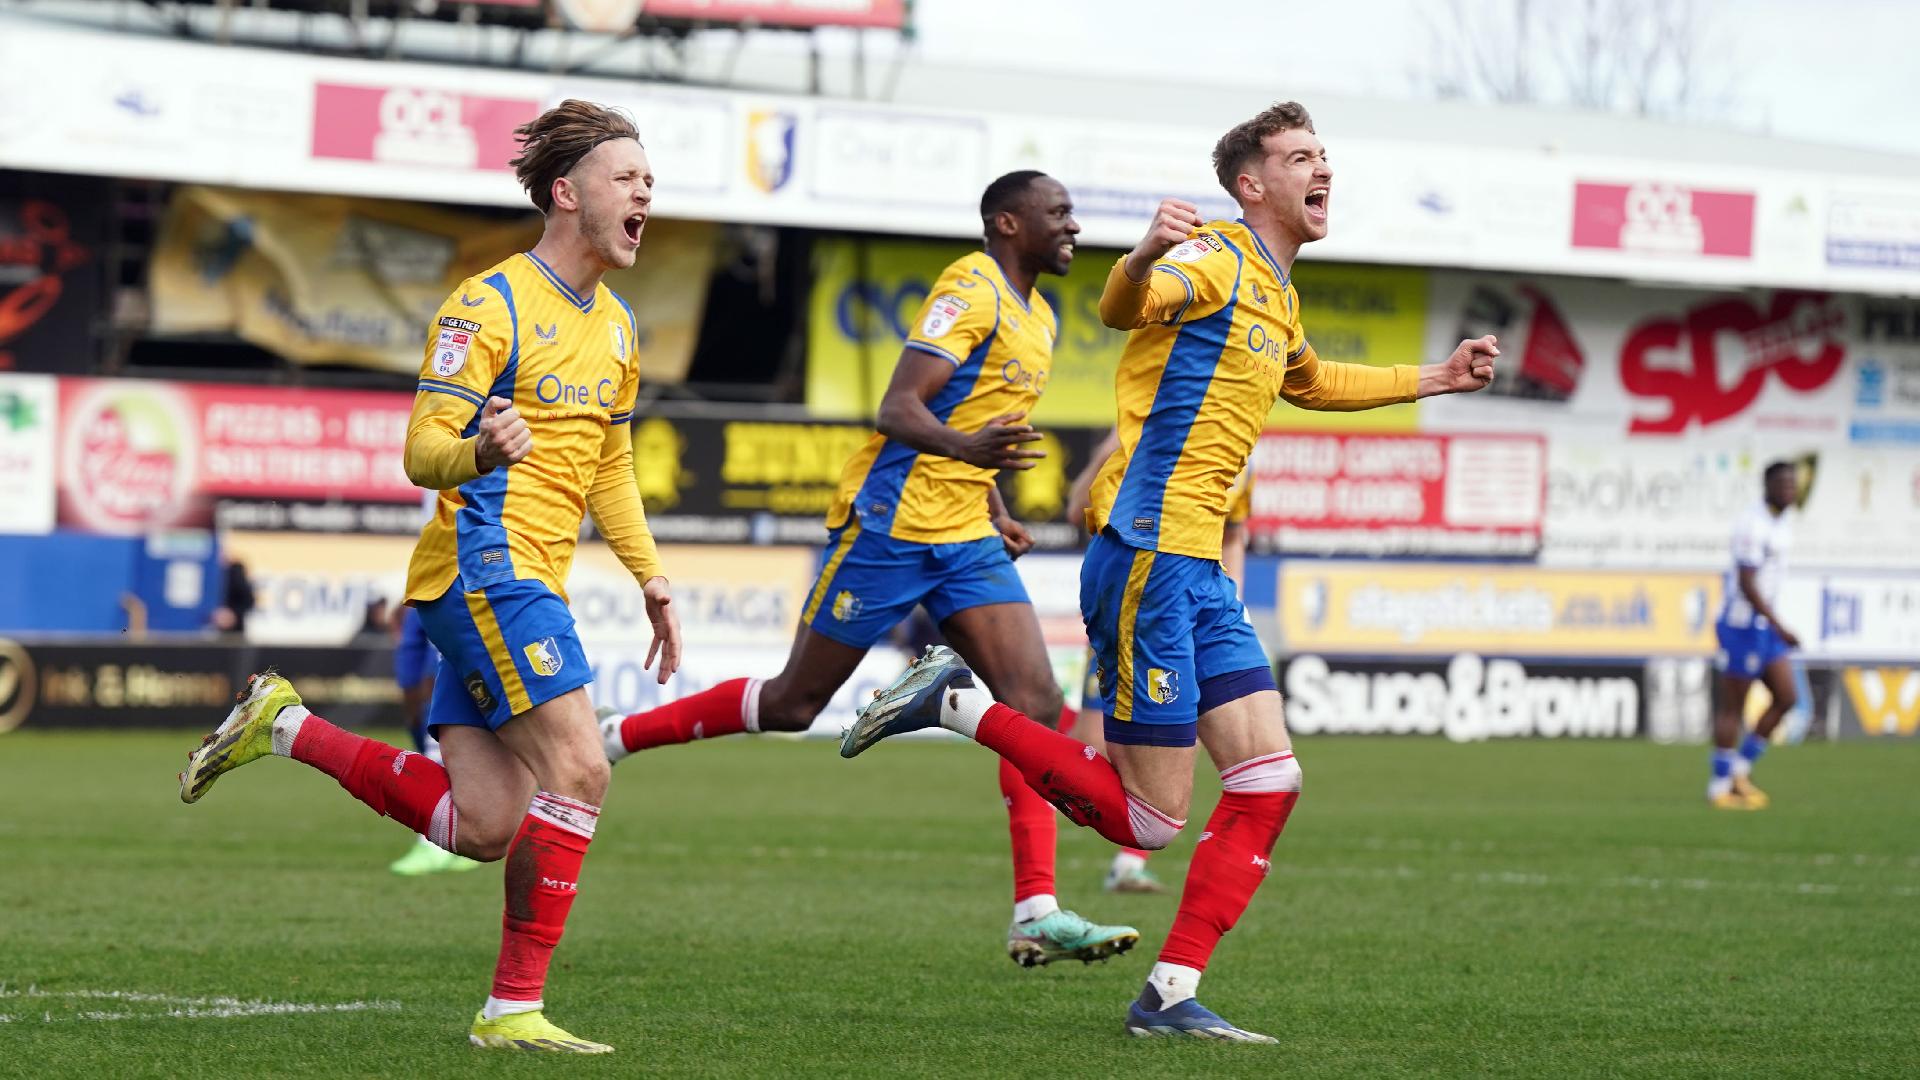 Lowly Colchester earn vital point in draw at table-topping Mansfield